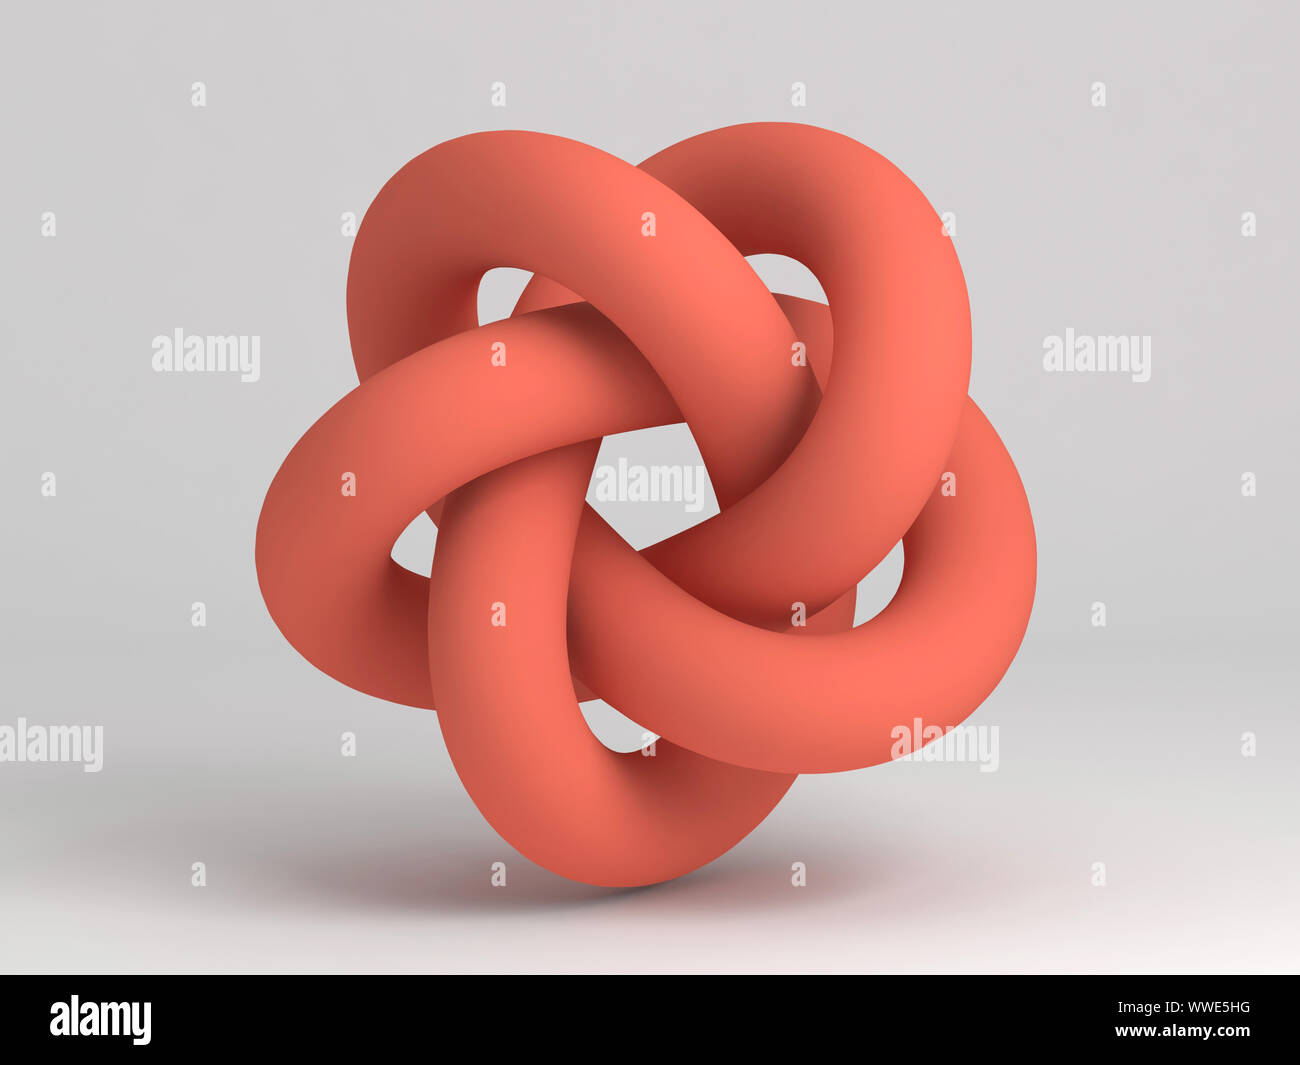 Torus knot. Abstract red object on white background. 3d rendering illustration Stock Photo